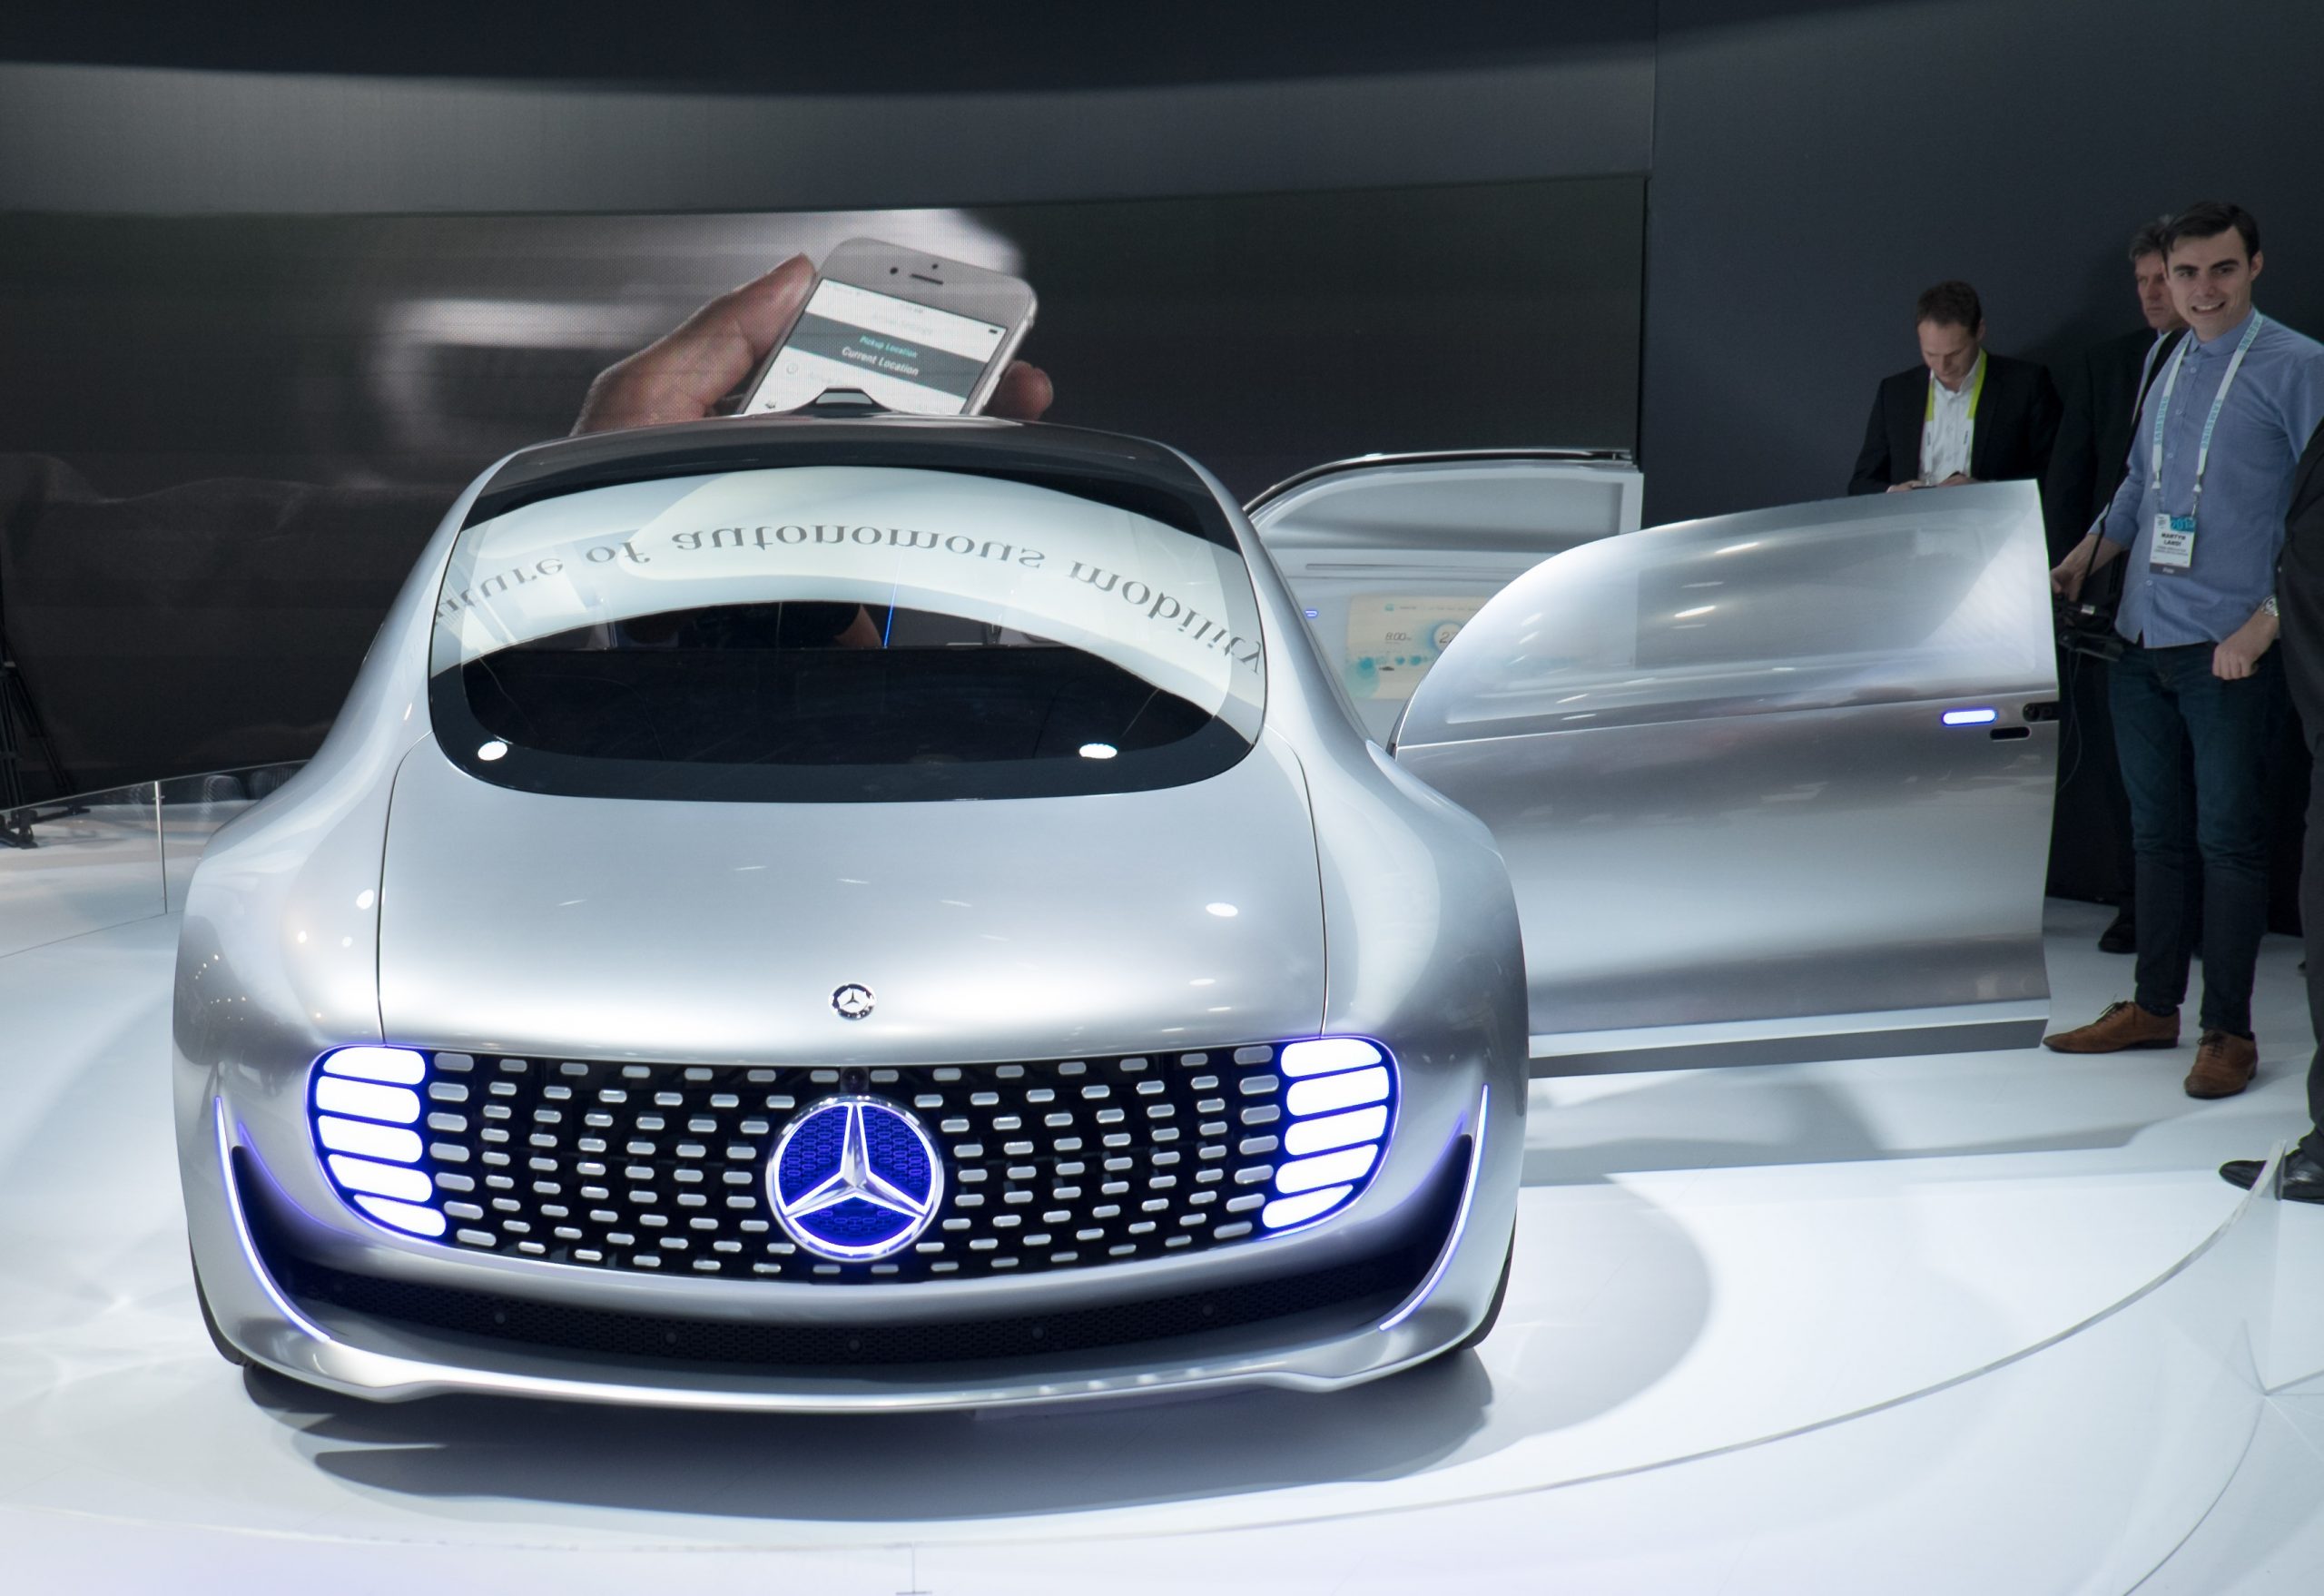 The Best of CES 2015: The Mercedes F 015 Luxury in Motion